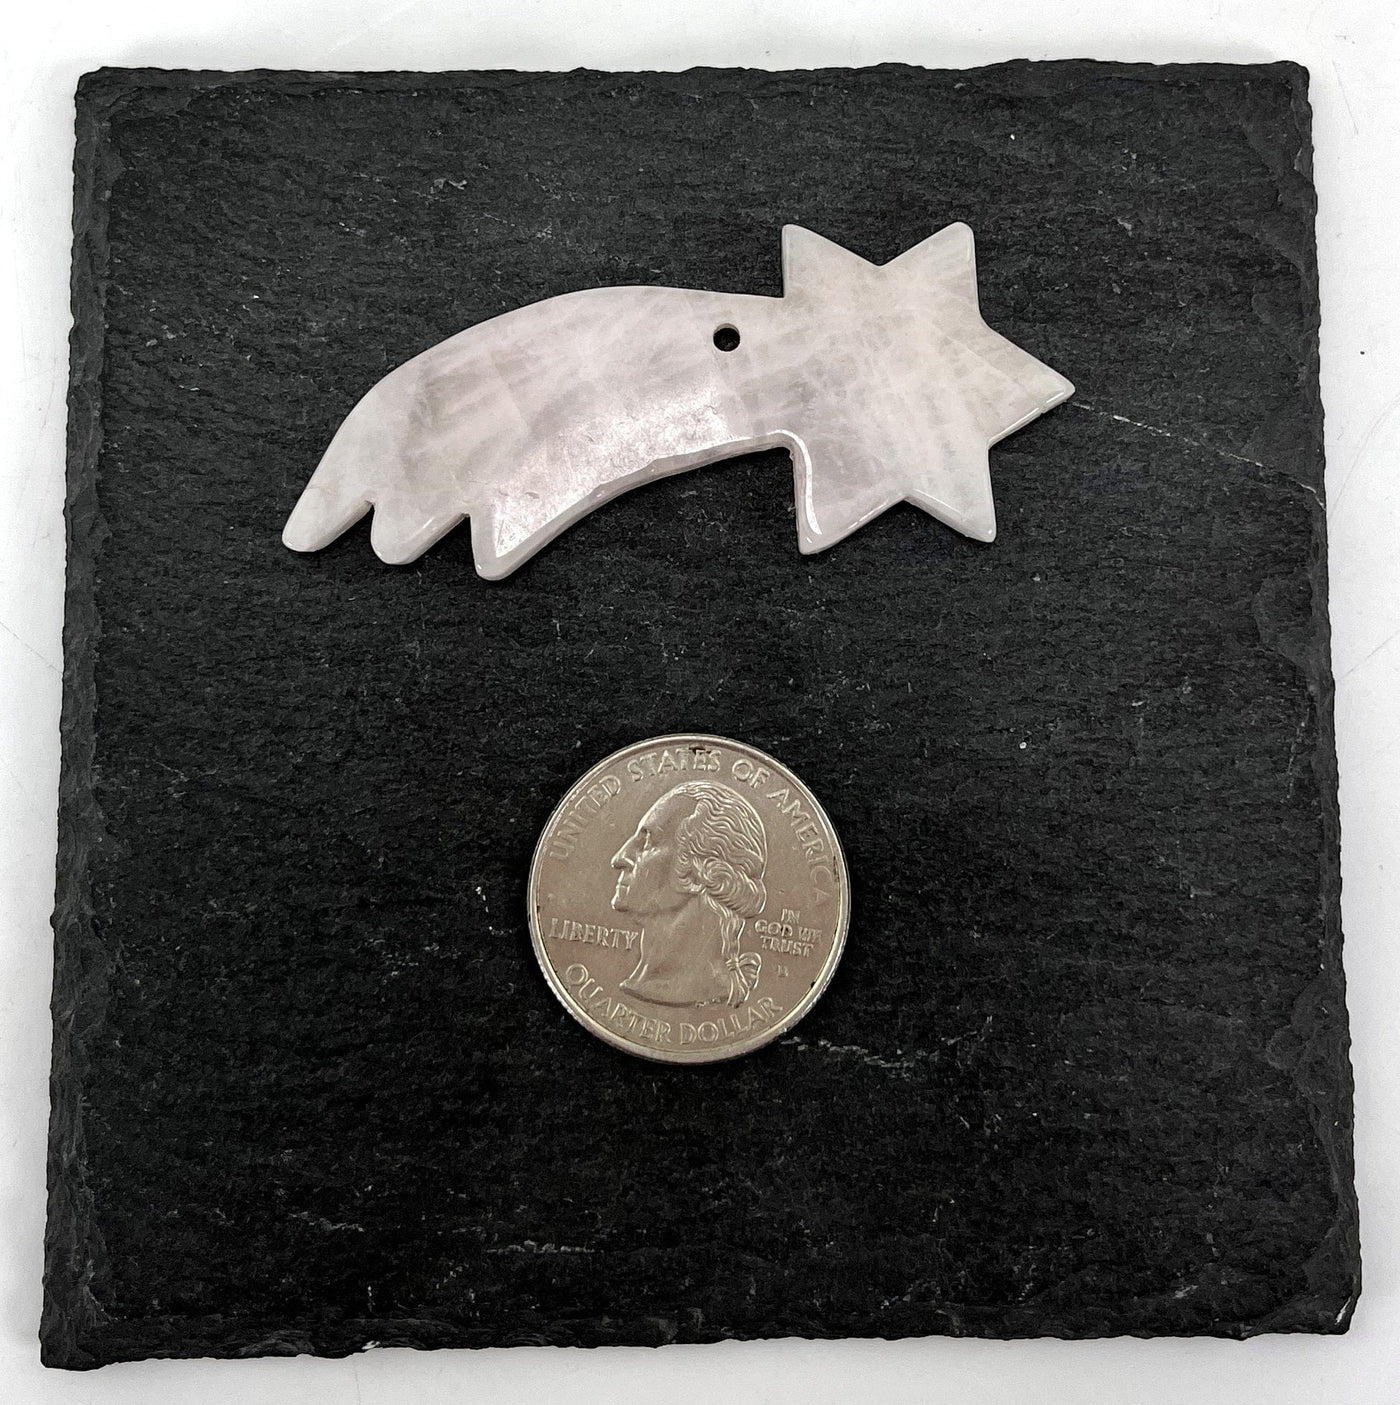 shooting star pendant shown next to a quarter for size reference